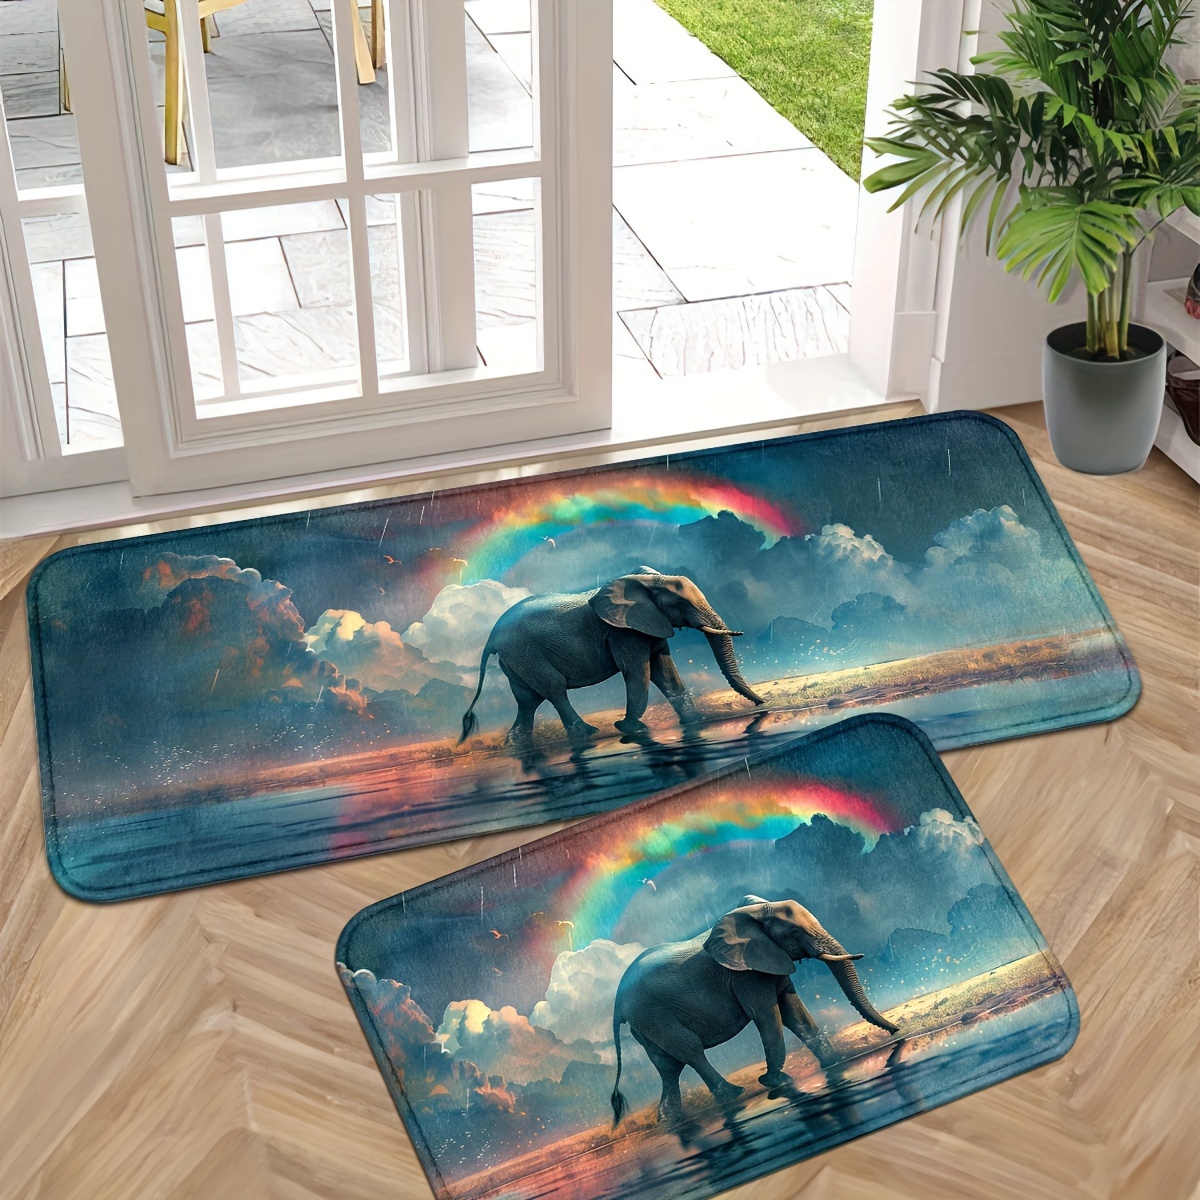 

Elephant And Rainbow Design Indoor Door Mat - Non-slip, Washable Polyester Entrance Rug For Kitchen, Bathroom, Laundry Room - Machine Made, Easy Care Entryway Floor Mat